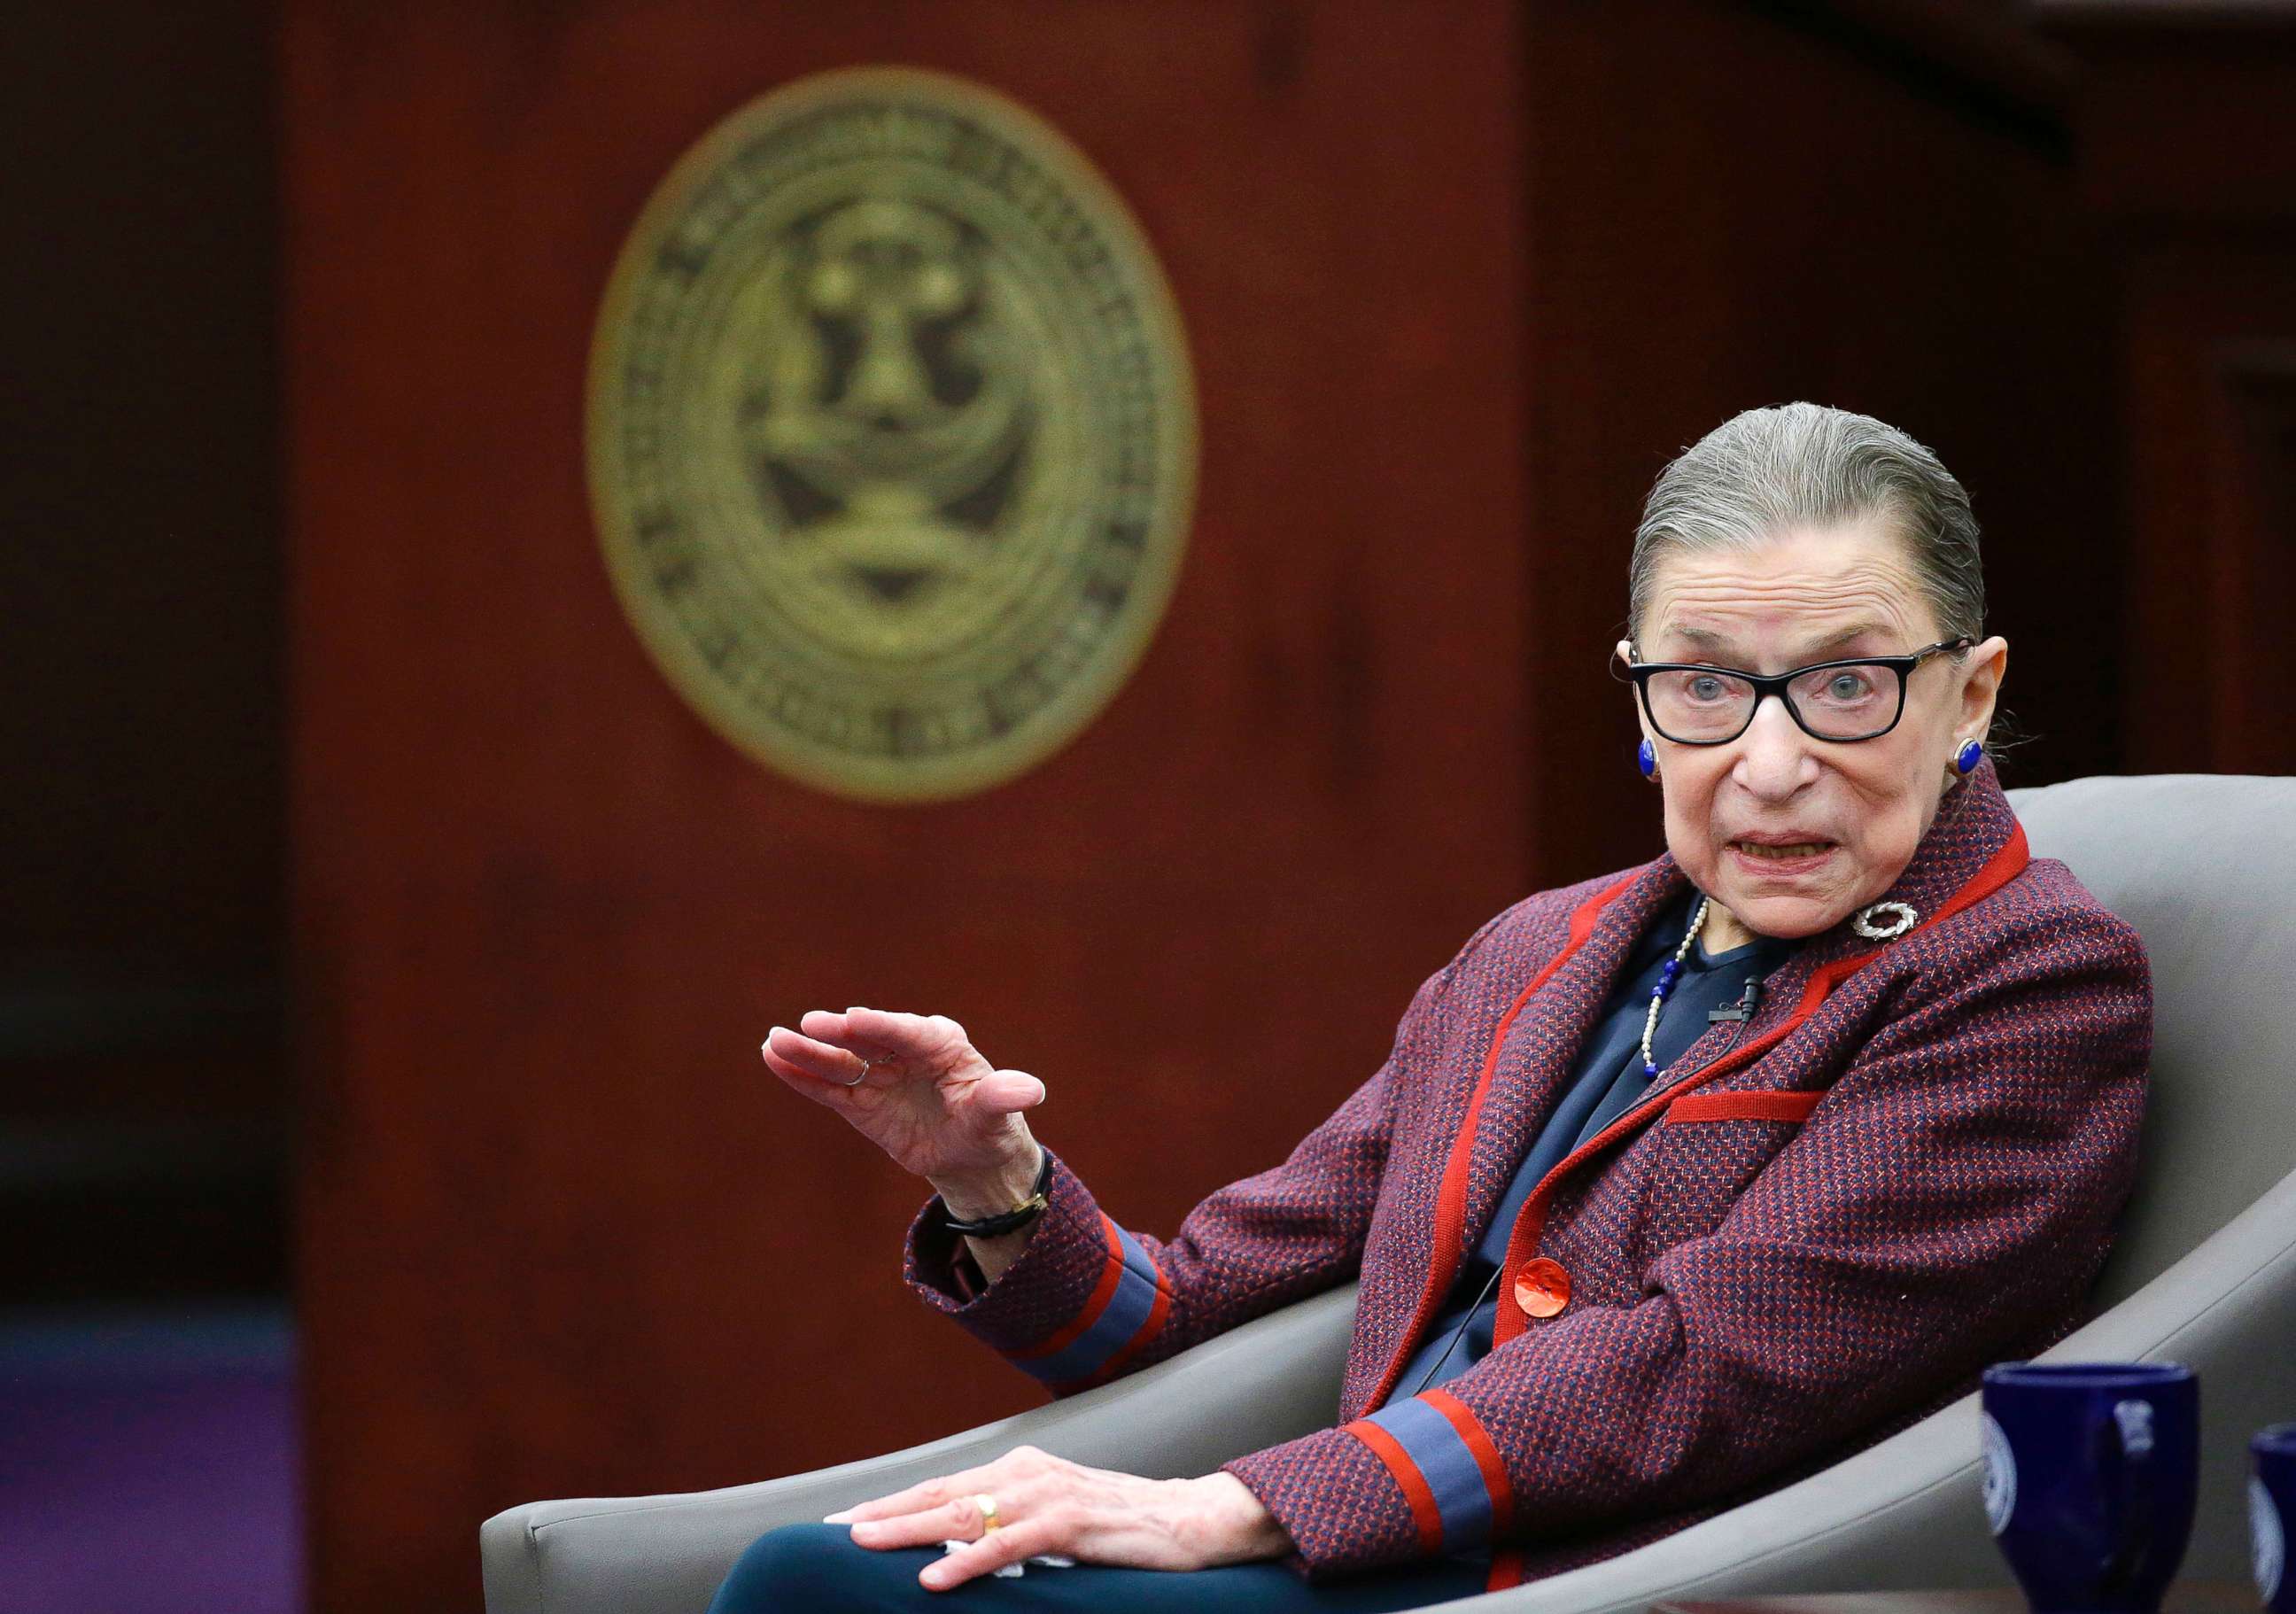 PHOTO: U.S. Supreme Court Justice Ruth Bader Ginsburg answers a law student's question as she participates in a "fireside chat" in the Bruce M. Selya Appellate Courtroom at the Roger William University Law School, Jan. 30, 2018, in Bristol, R.I.